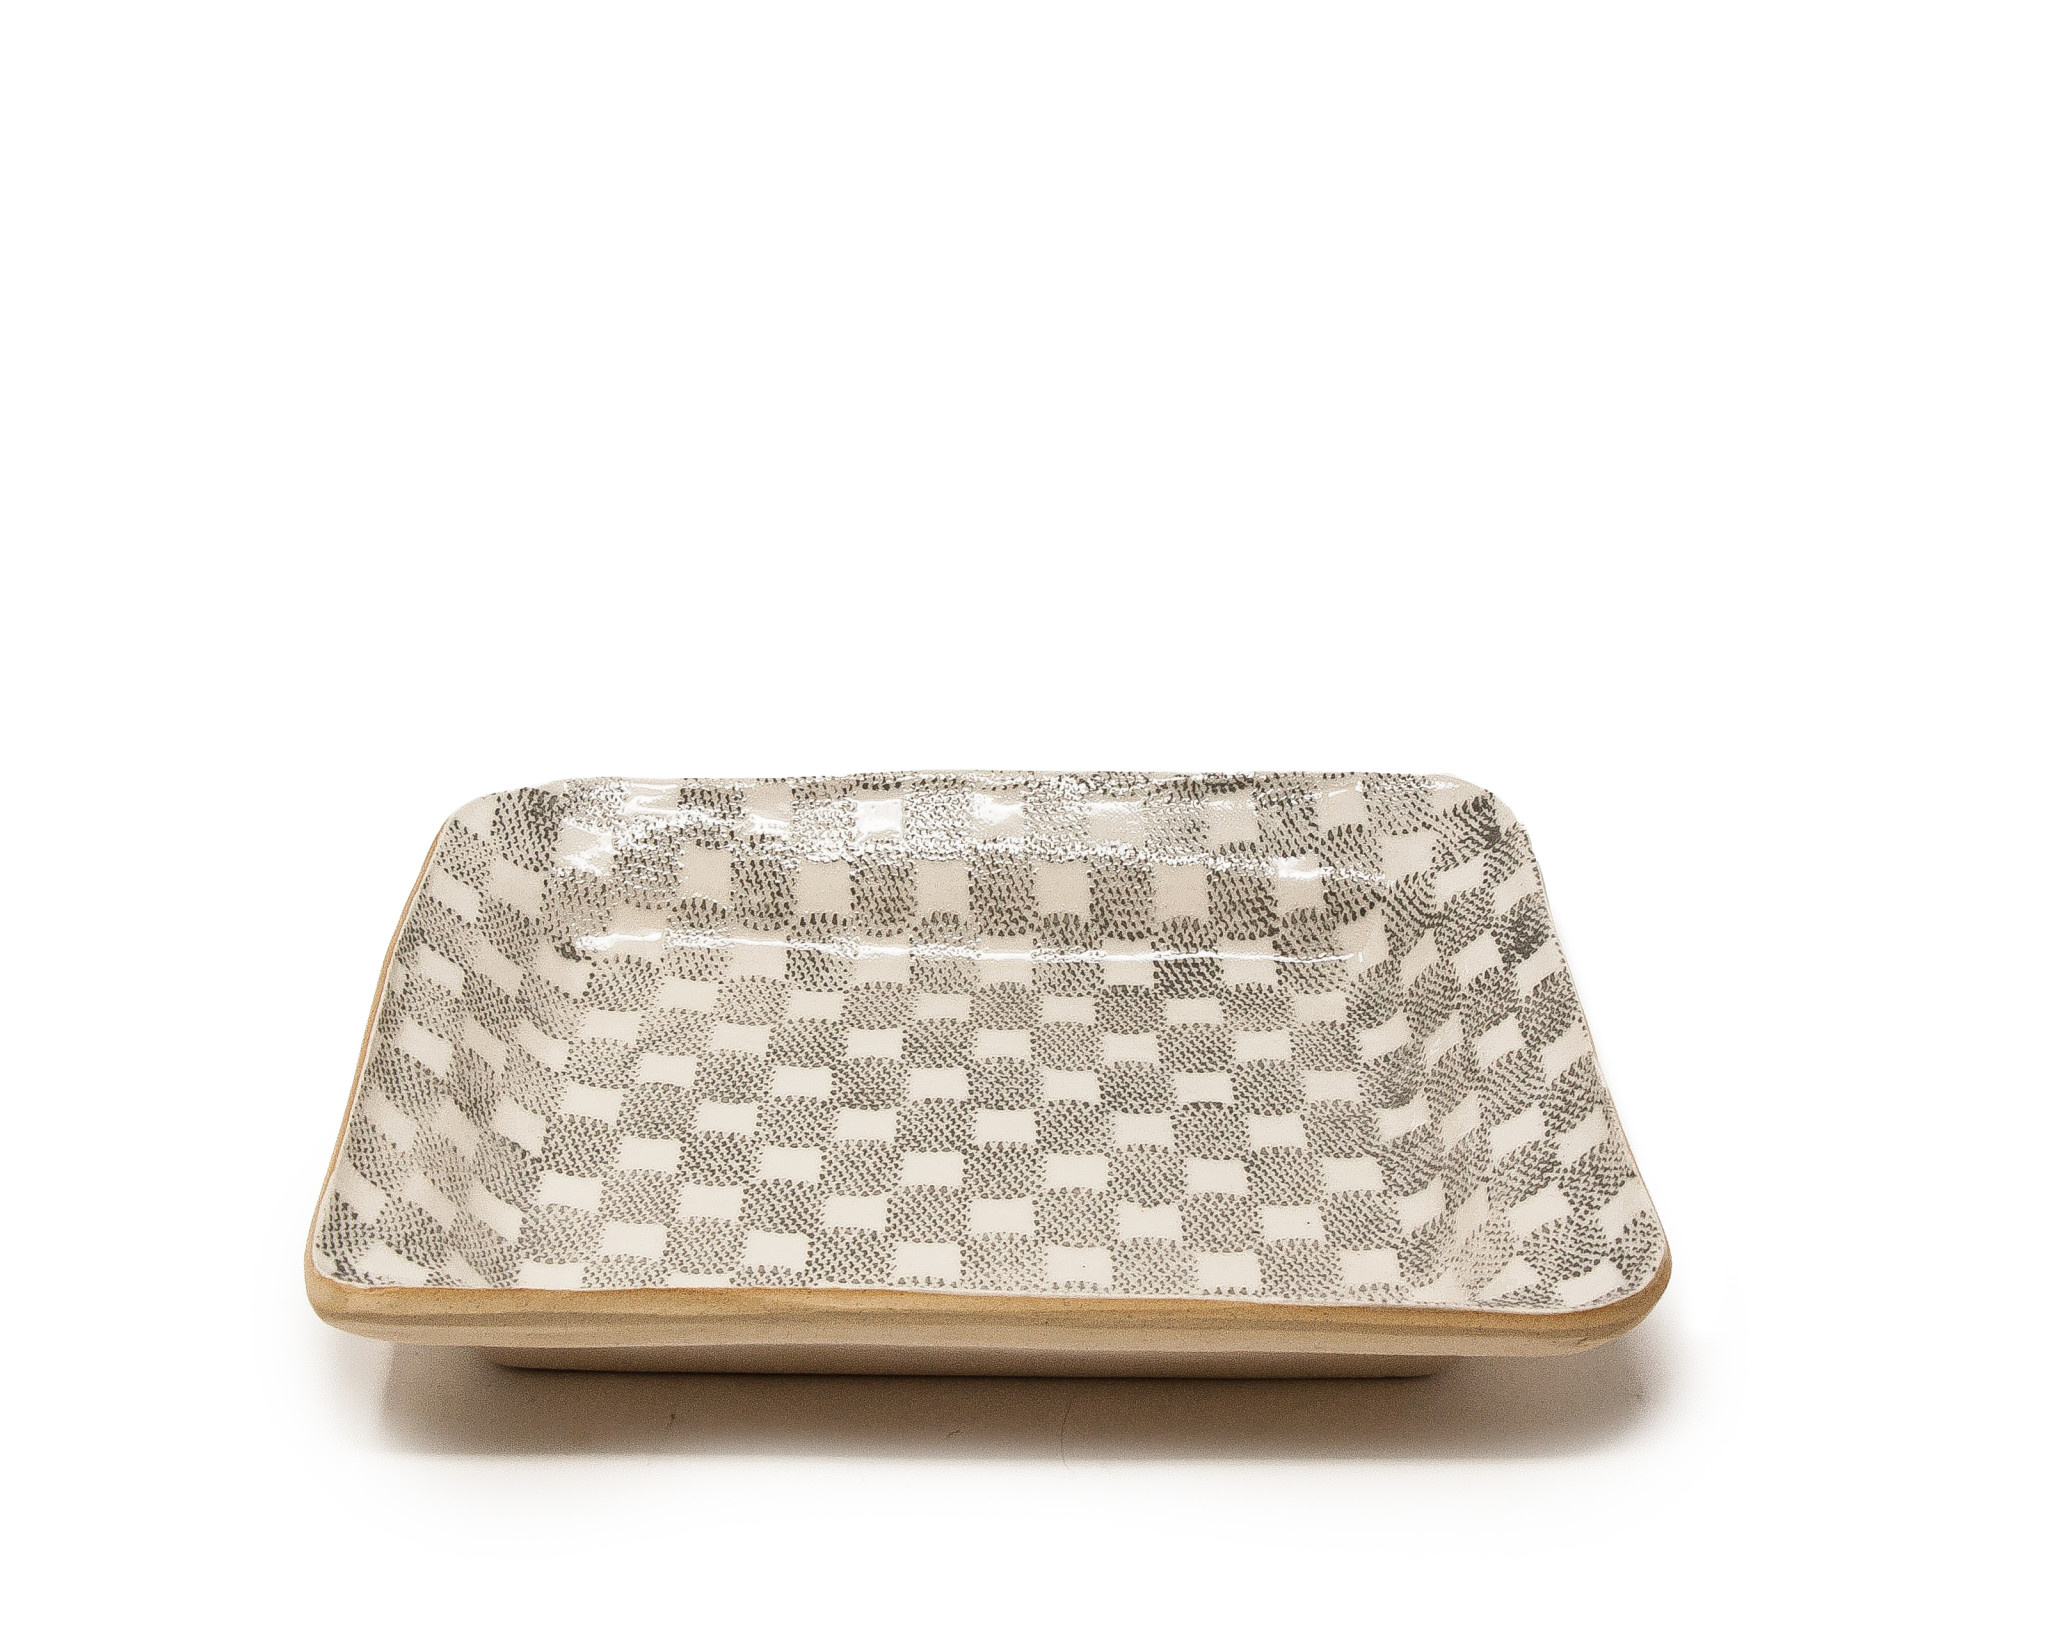 TERRAFIRMA, Small Party Platter, Checker, Charcoal, 3325309 - Touch of Class